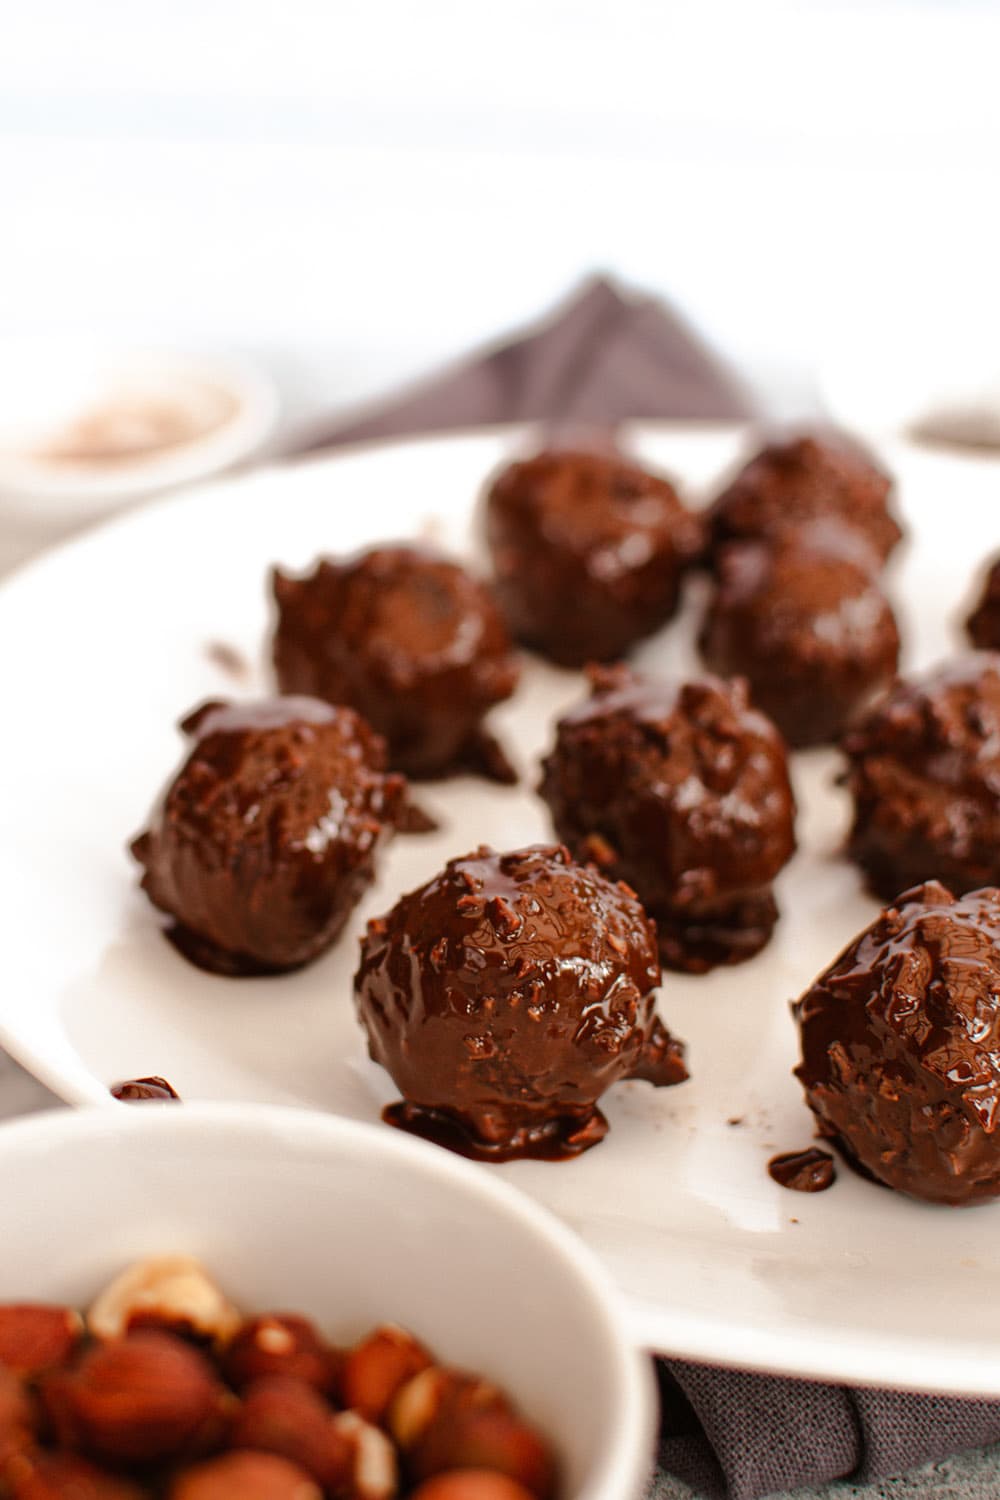 Chocolate covered coconut and date bites.